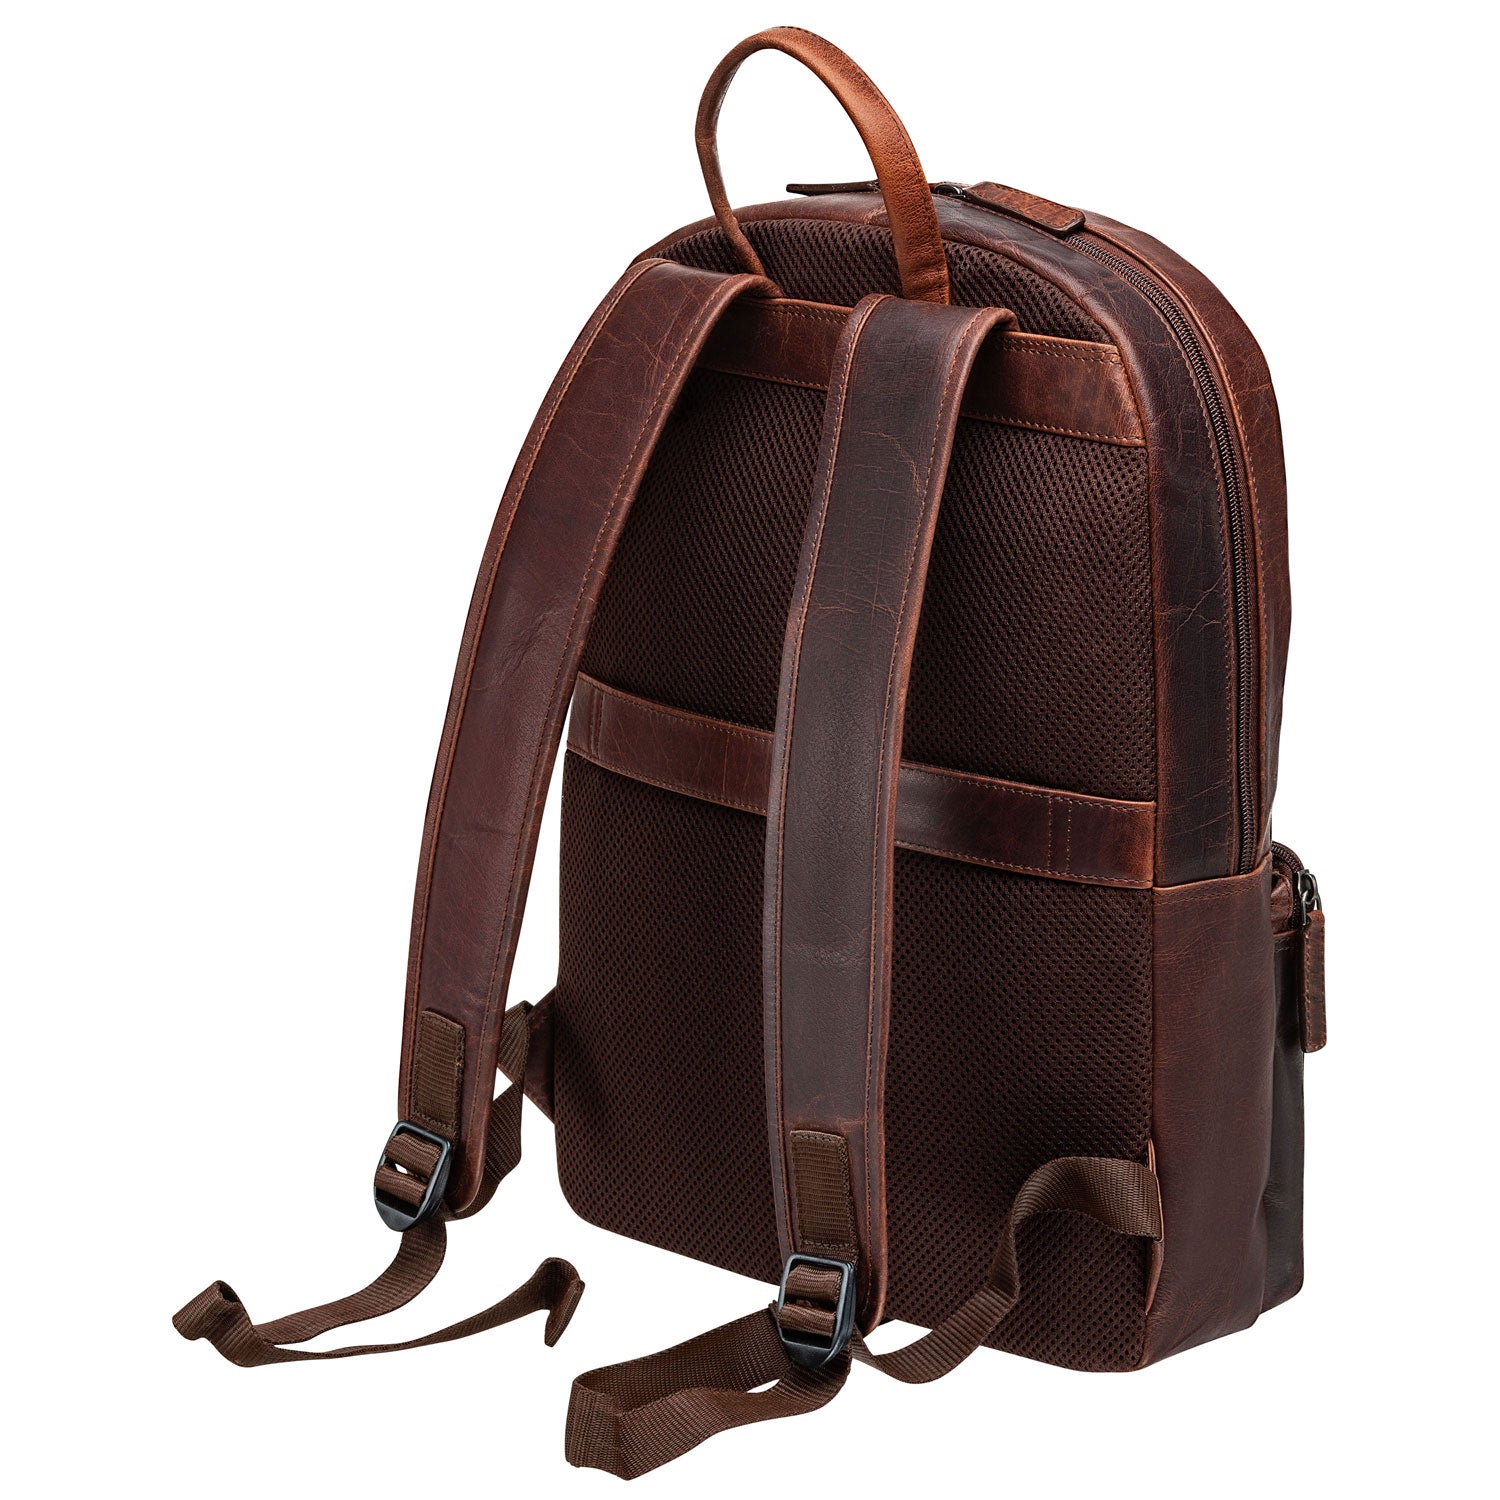 Slim Backpack for 14" Laptop, 12" x 4" x 16.25", Brown